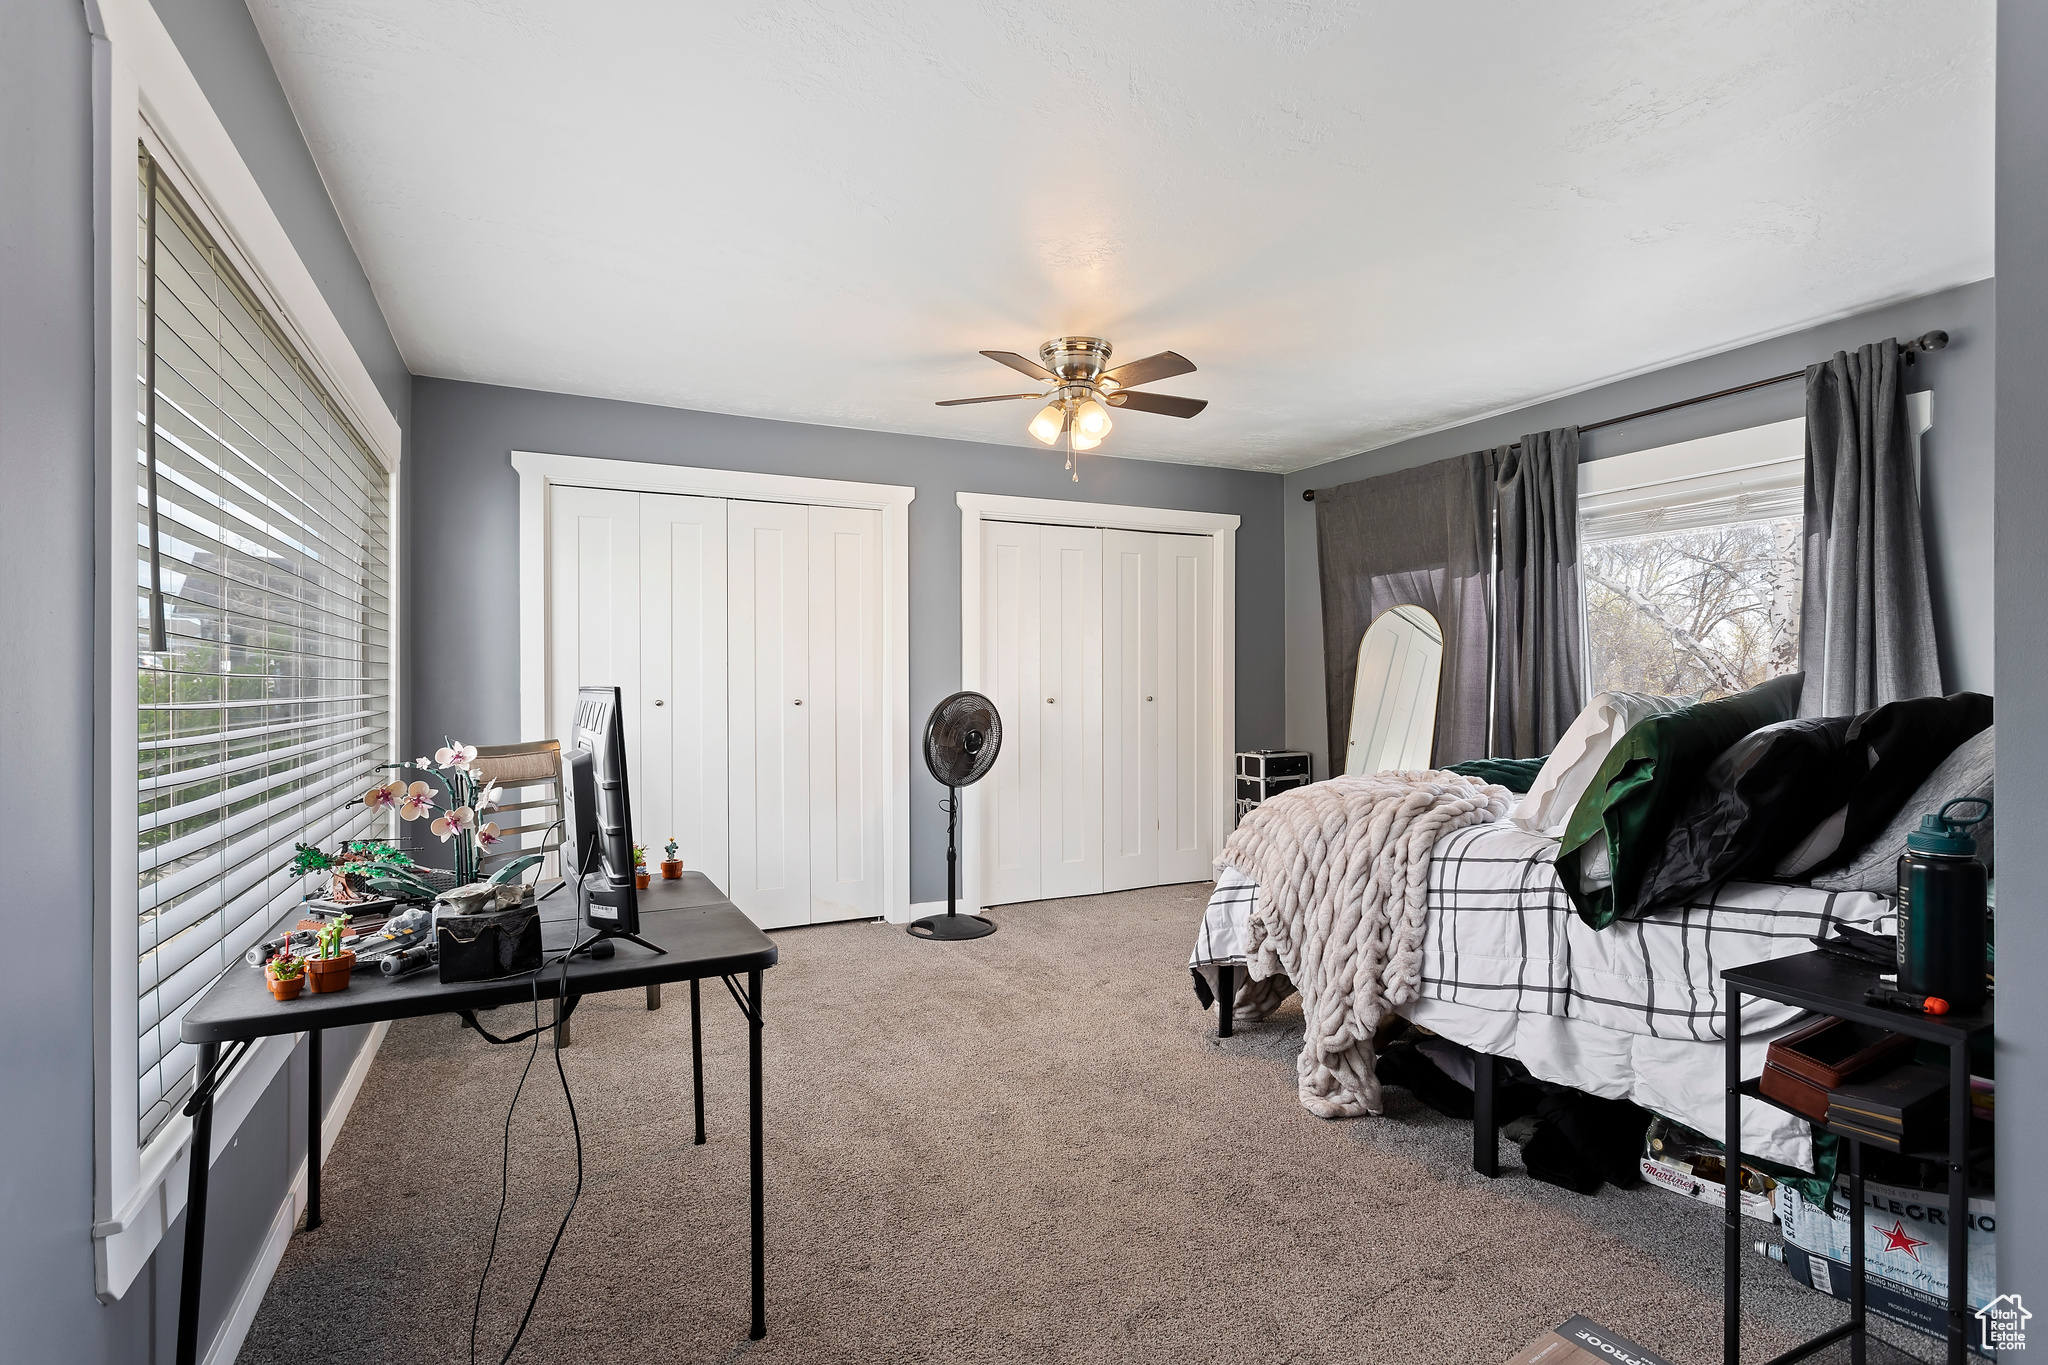 Bedroom with ceiling fan, dark carpet, and two closets